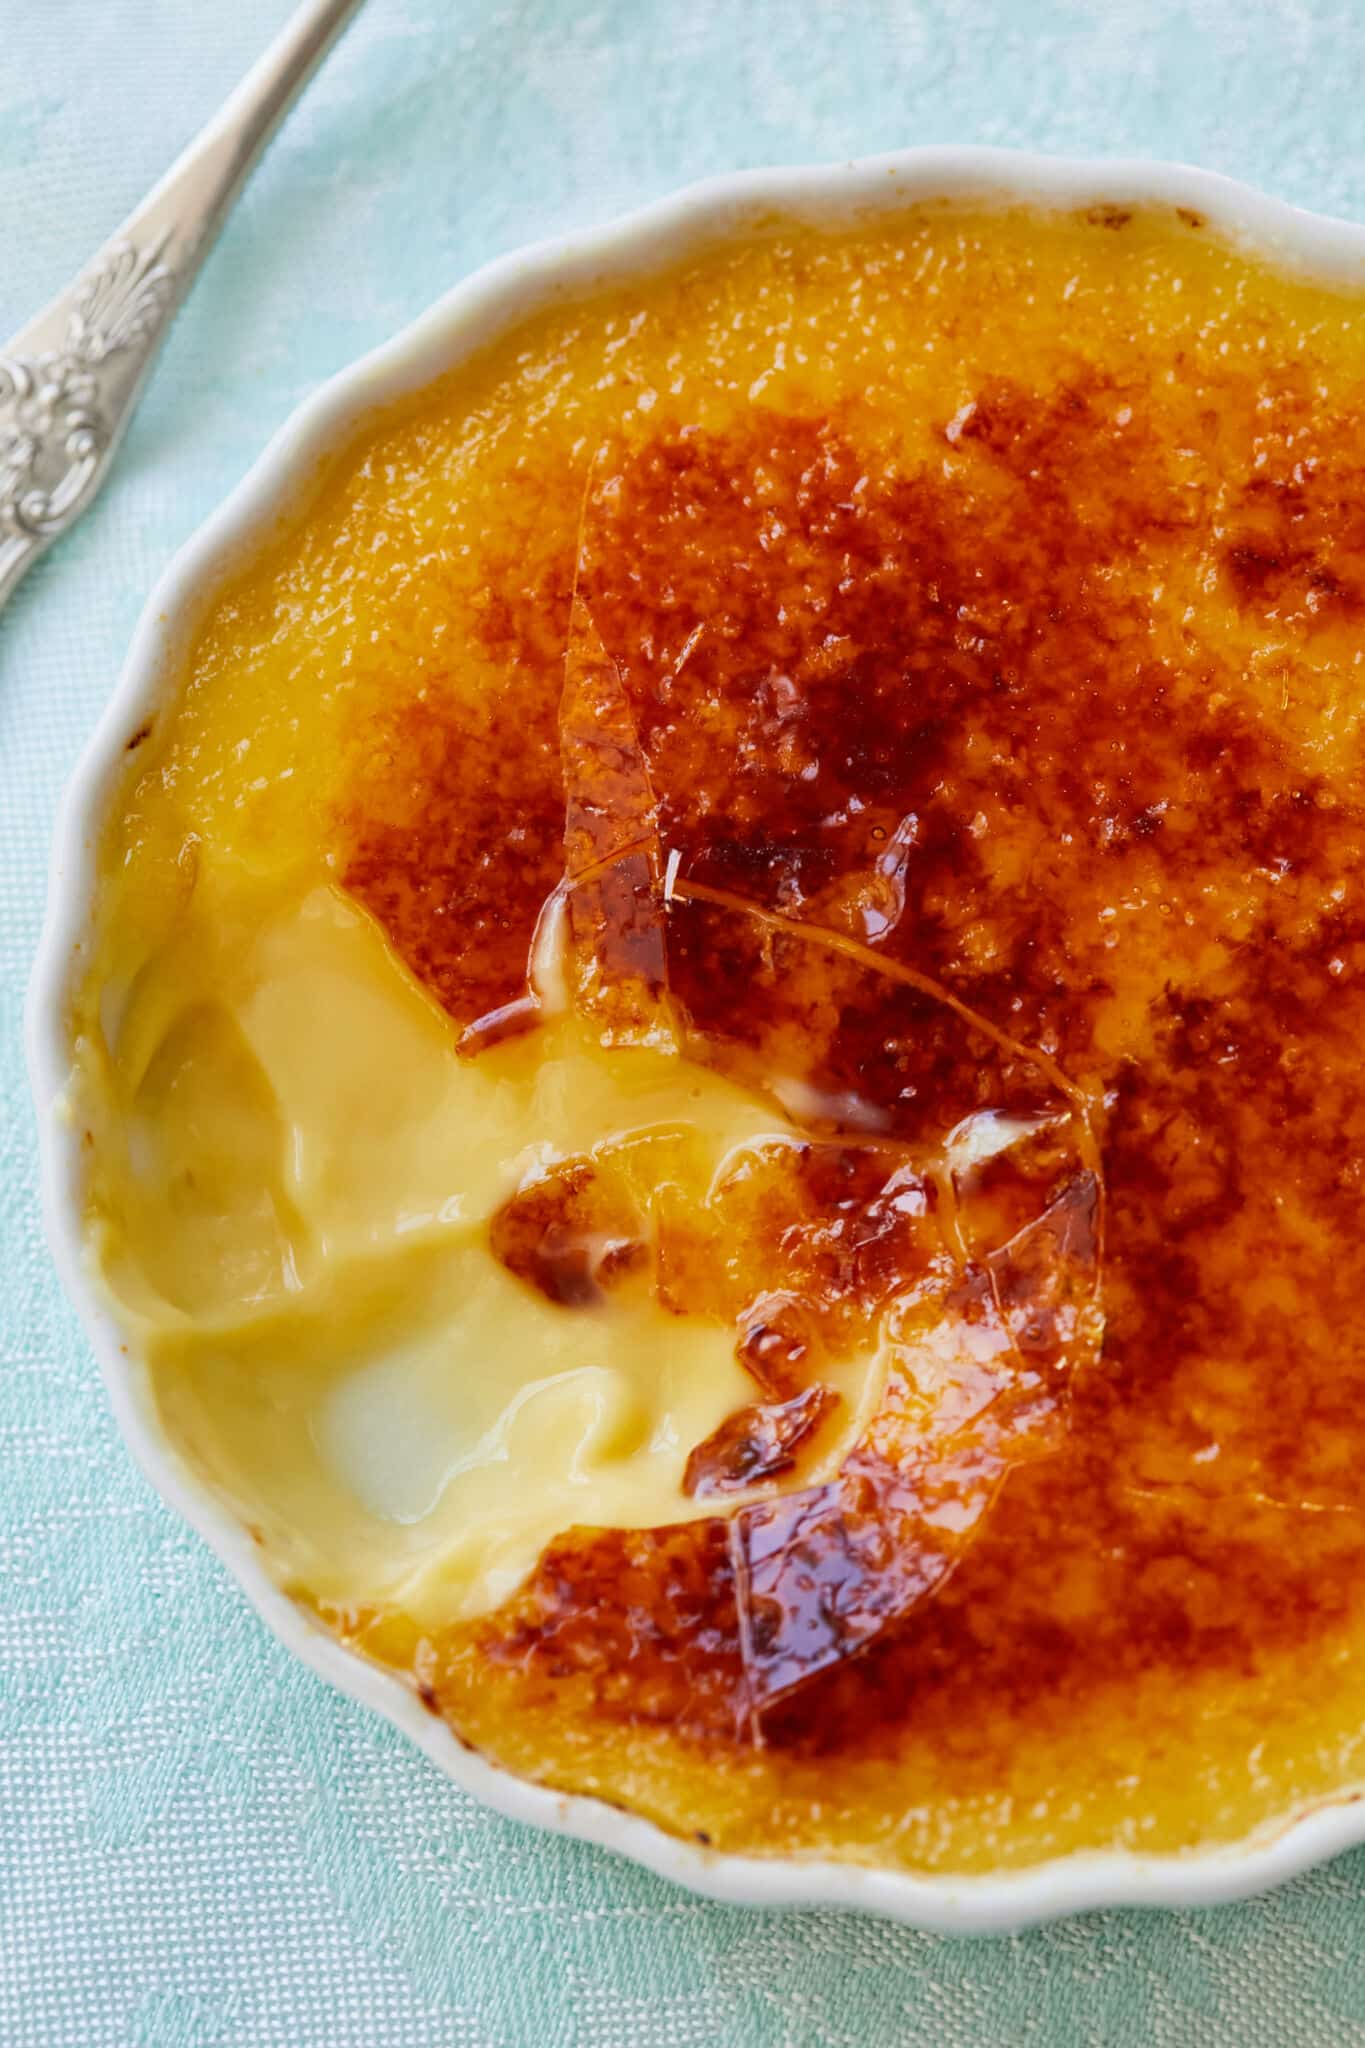 One bite has been taken from the Passionfruit Crème Brûlée. The close-up shot shows its silky smooth custard and crunchy caramelized top layer. 